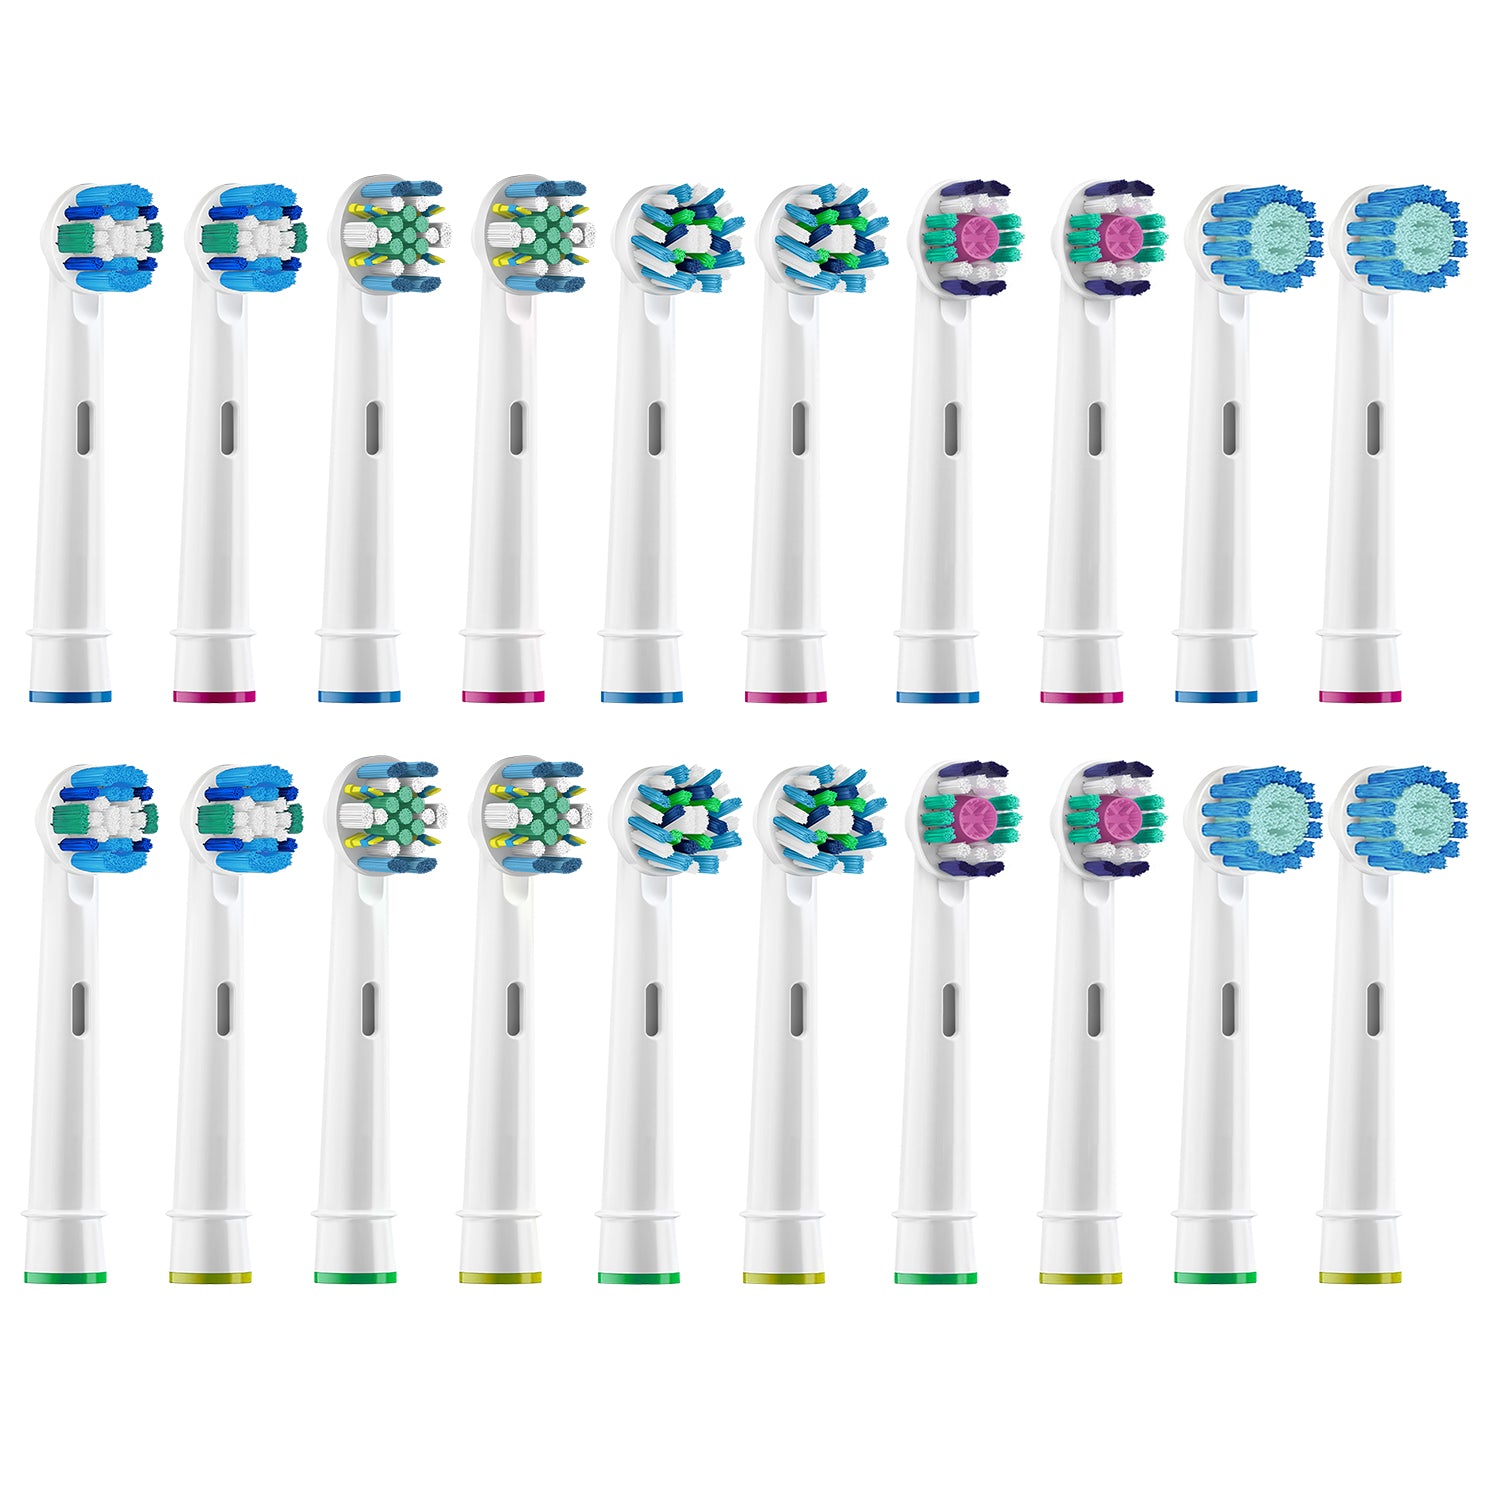 Replacement Toothbrush Heads Compatible for OralB EB17, 8 Pack